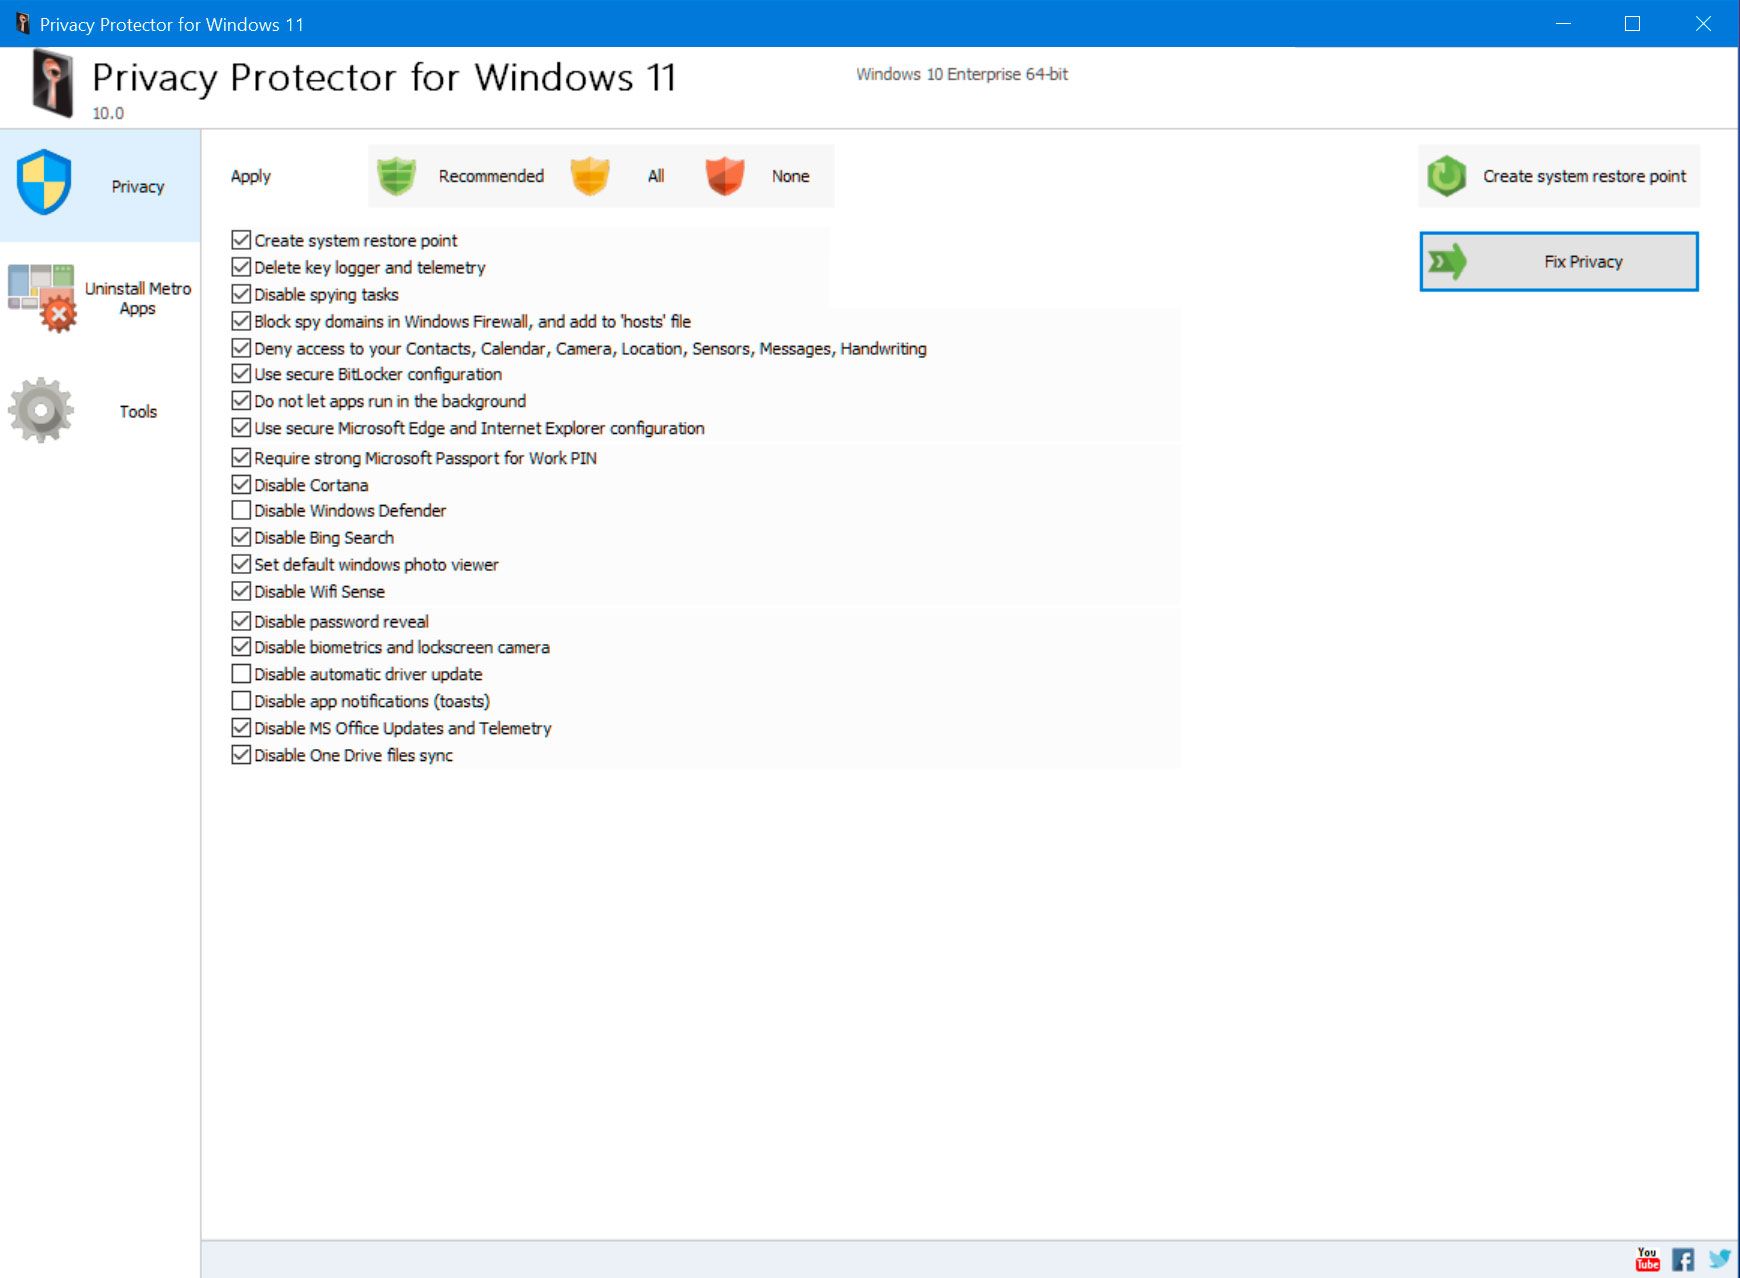 Privacy Protector for Windows 11 Screenshot.